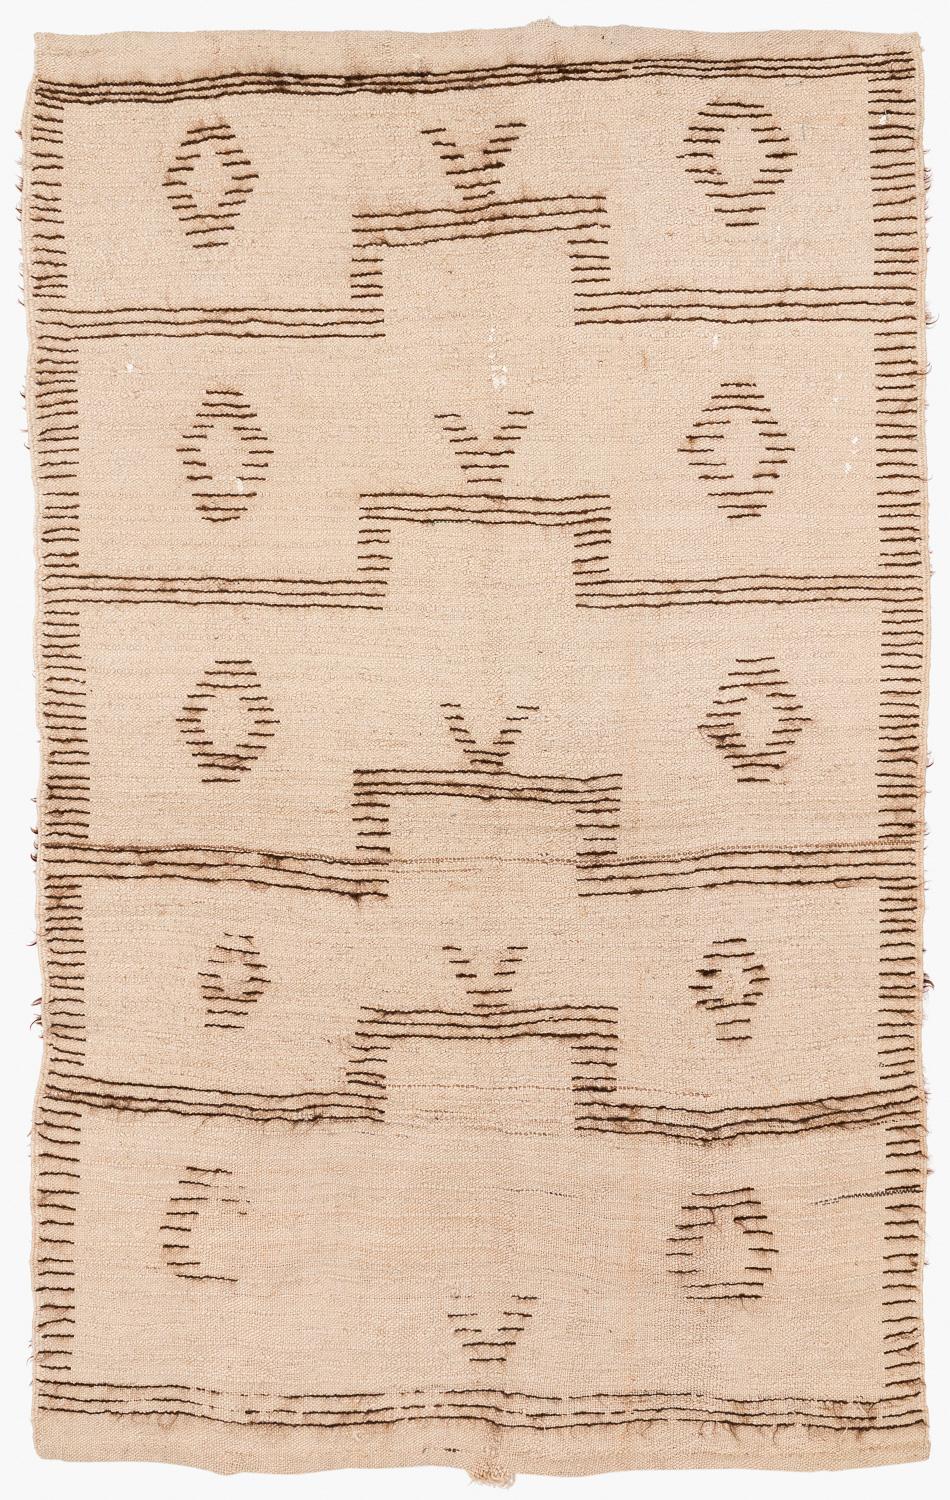 This Anatolian tulu has an archaic design that reaches way back in time. The rug is woven with very soft wool or possible angora. This would make a very good wall hanging or could be used in a low traffic area such as a bedroom. Measures: 2'6” x